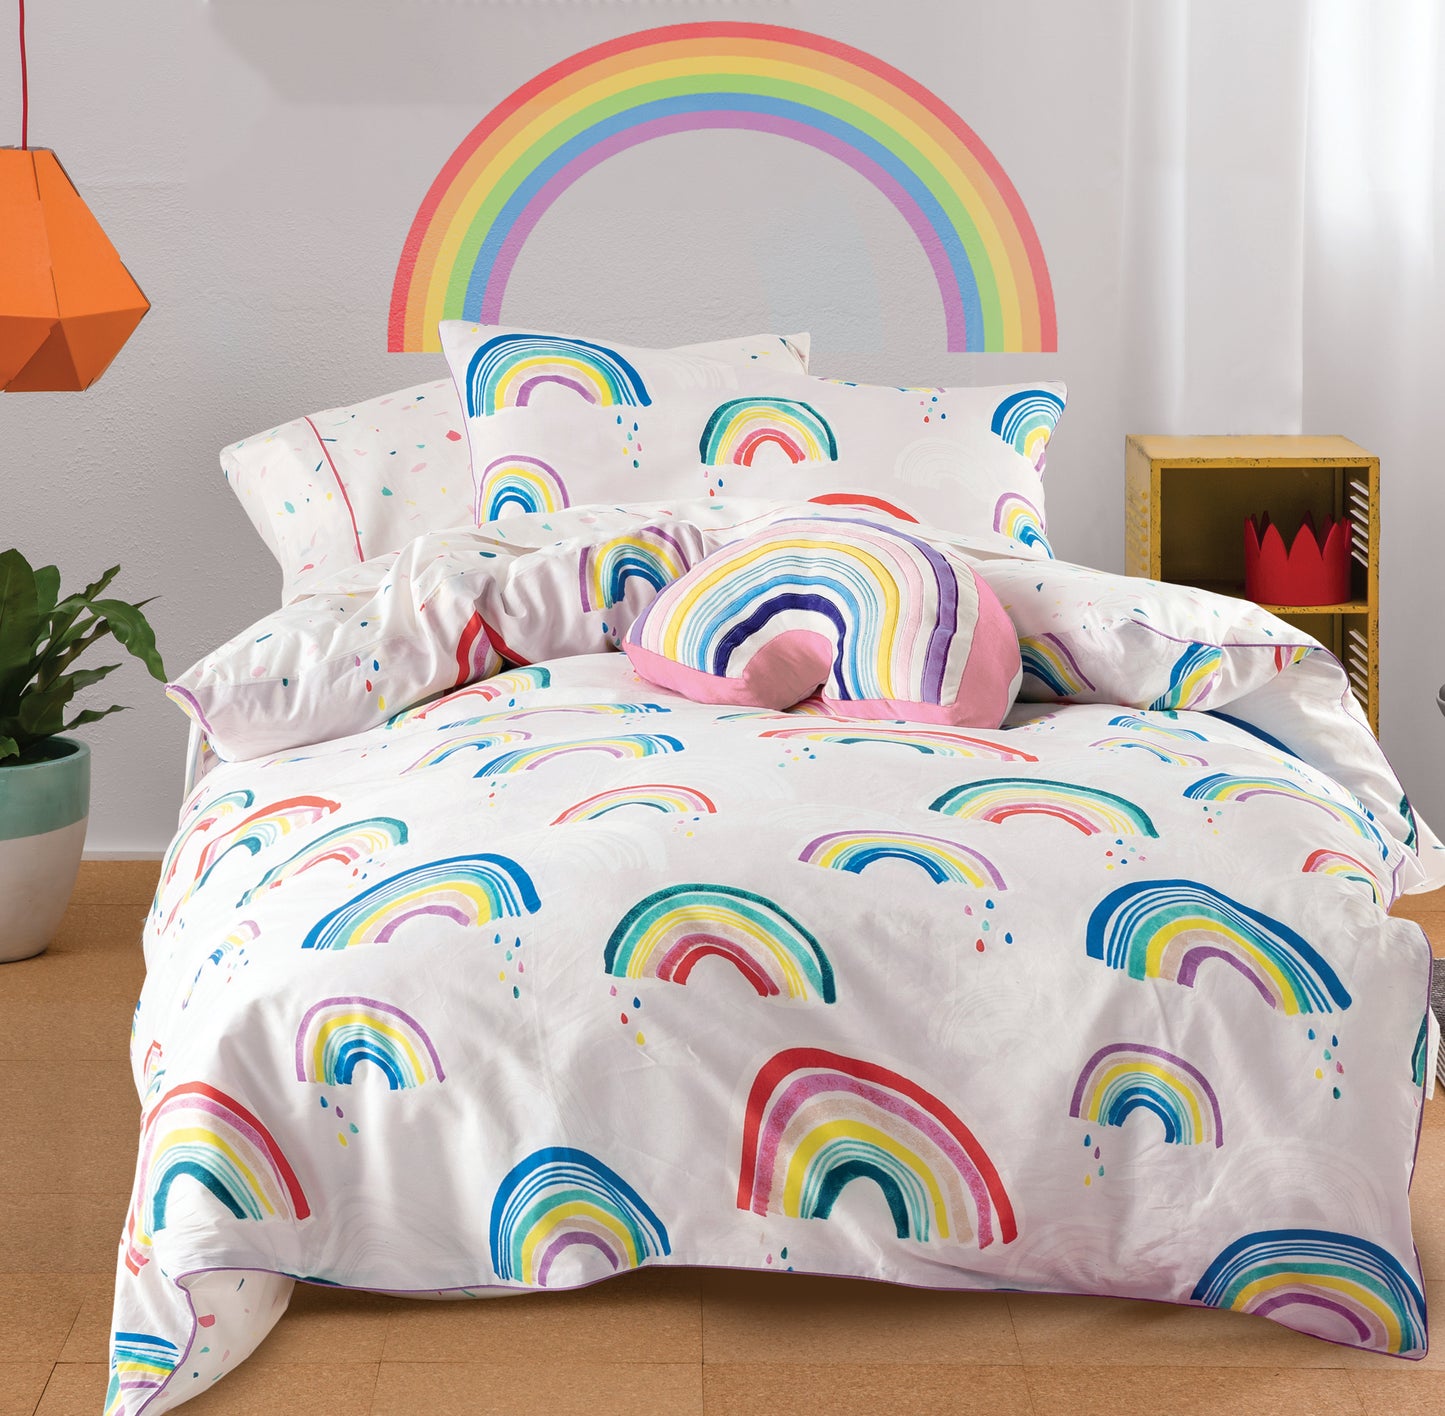 OVER THE RAINBOW - Digital Printed Quilt Cover